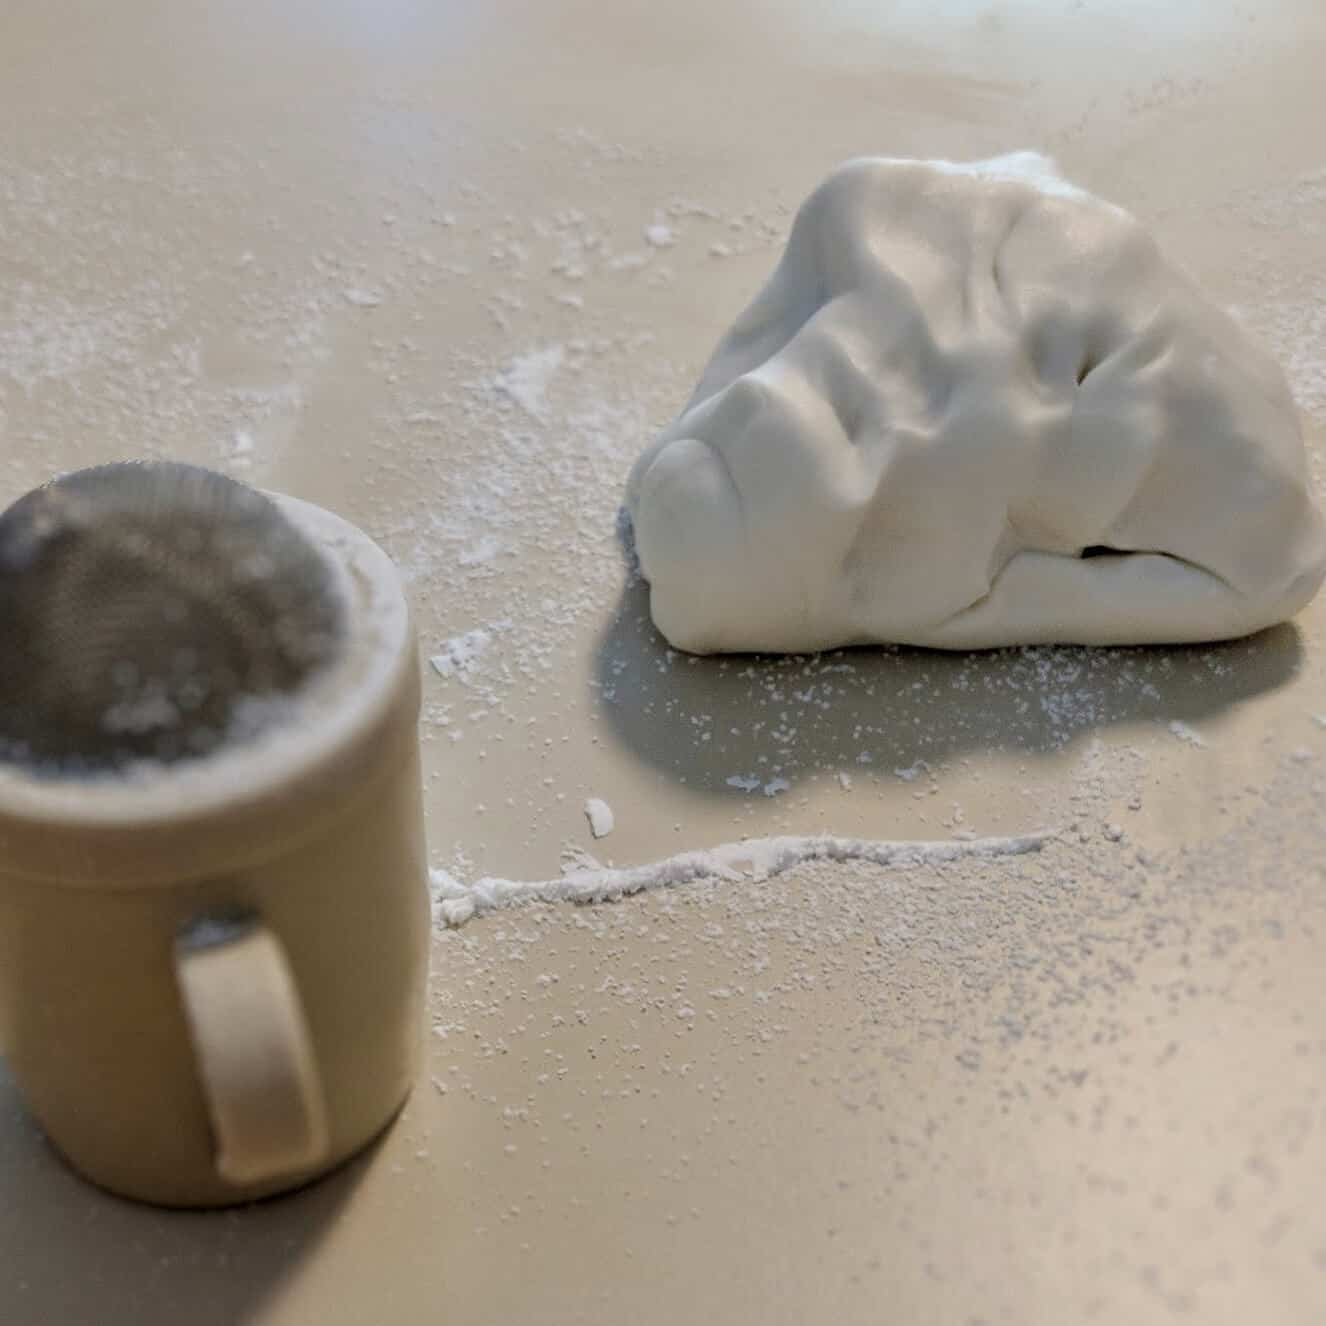 Kneaded marshmallow fondant on a powdered-sugar-dusted counter next to a shaker.